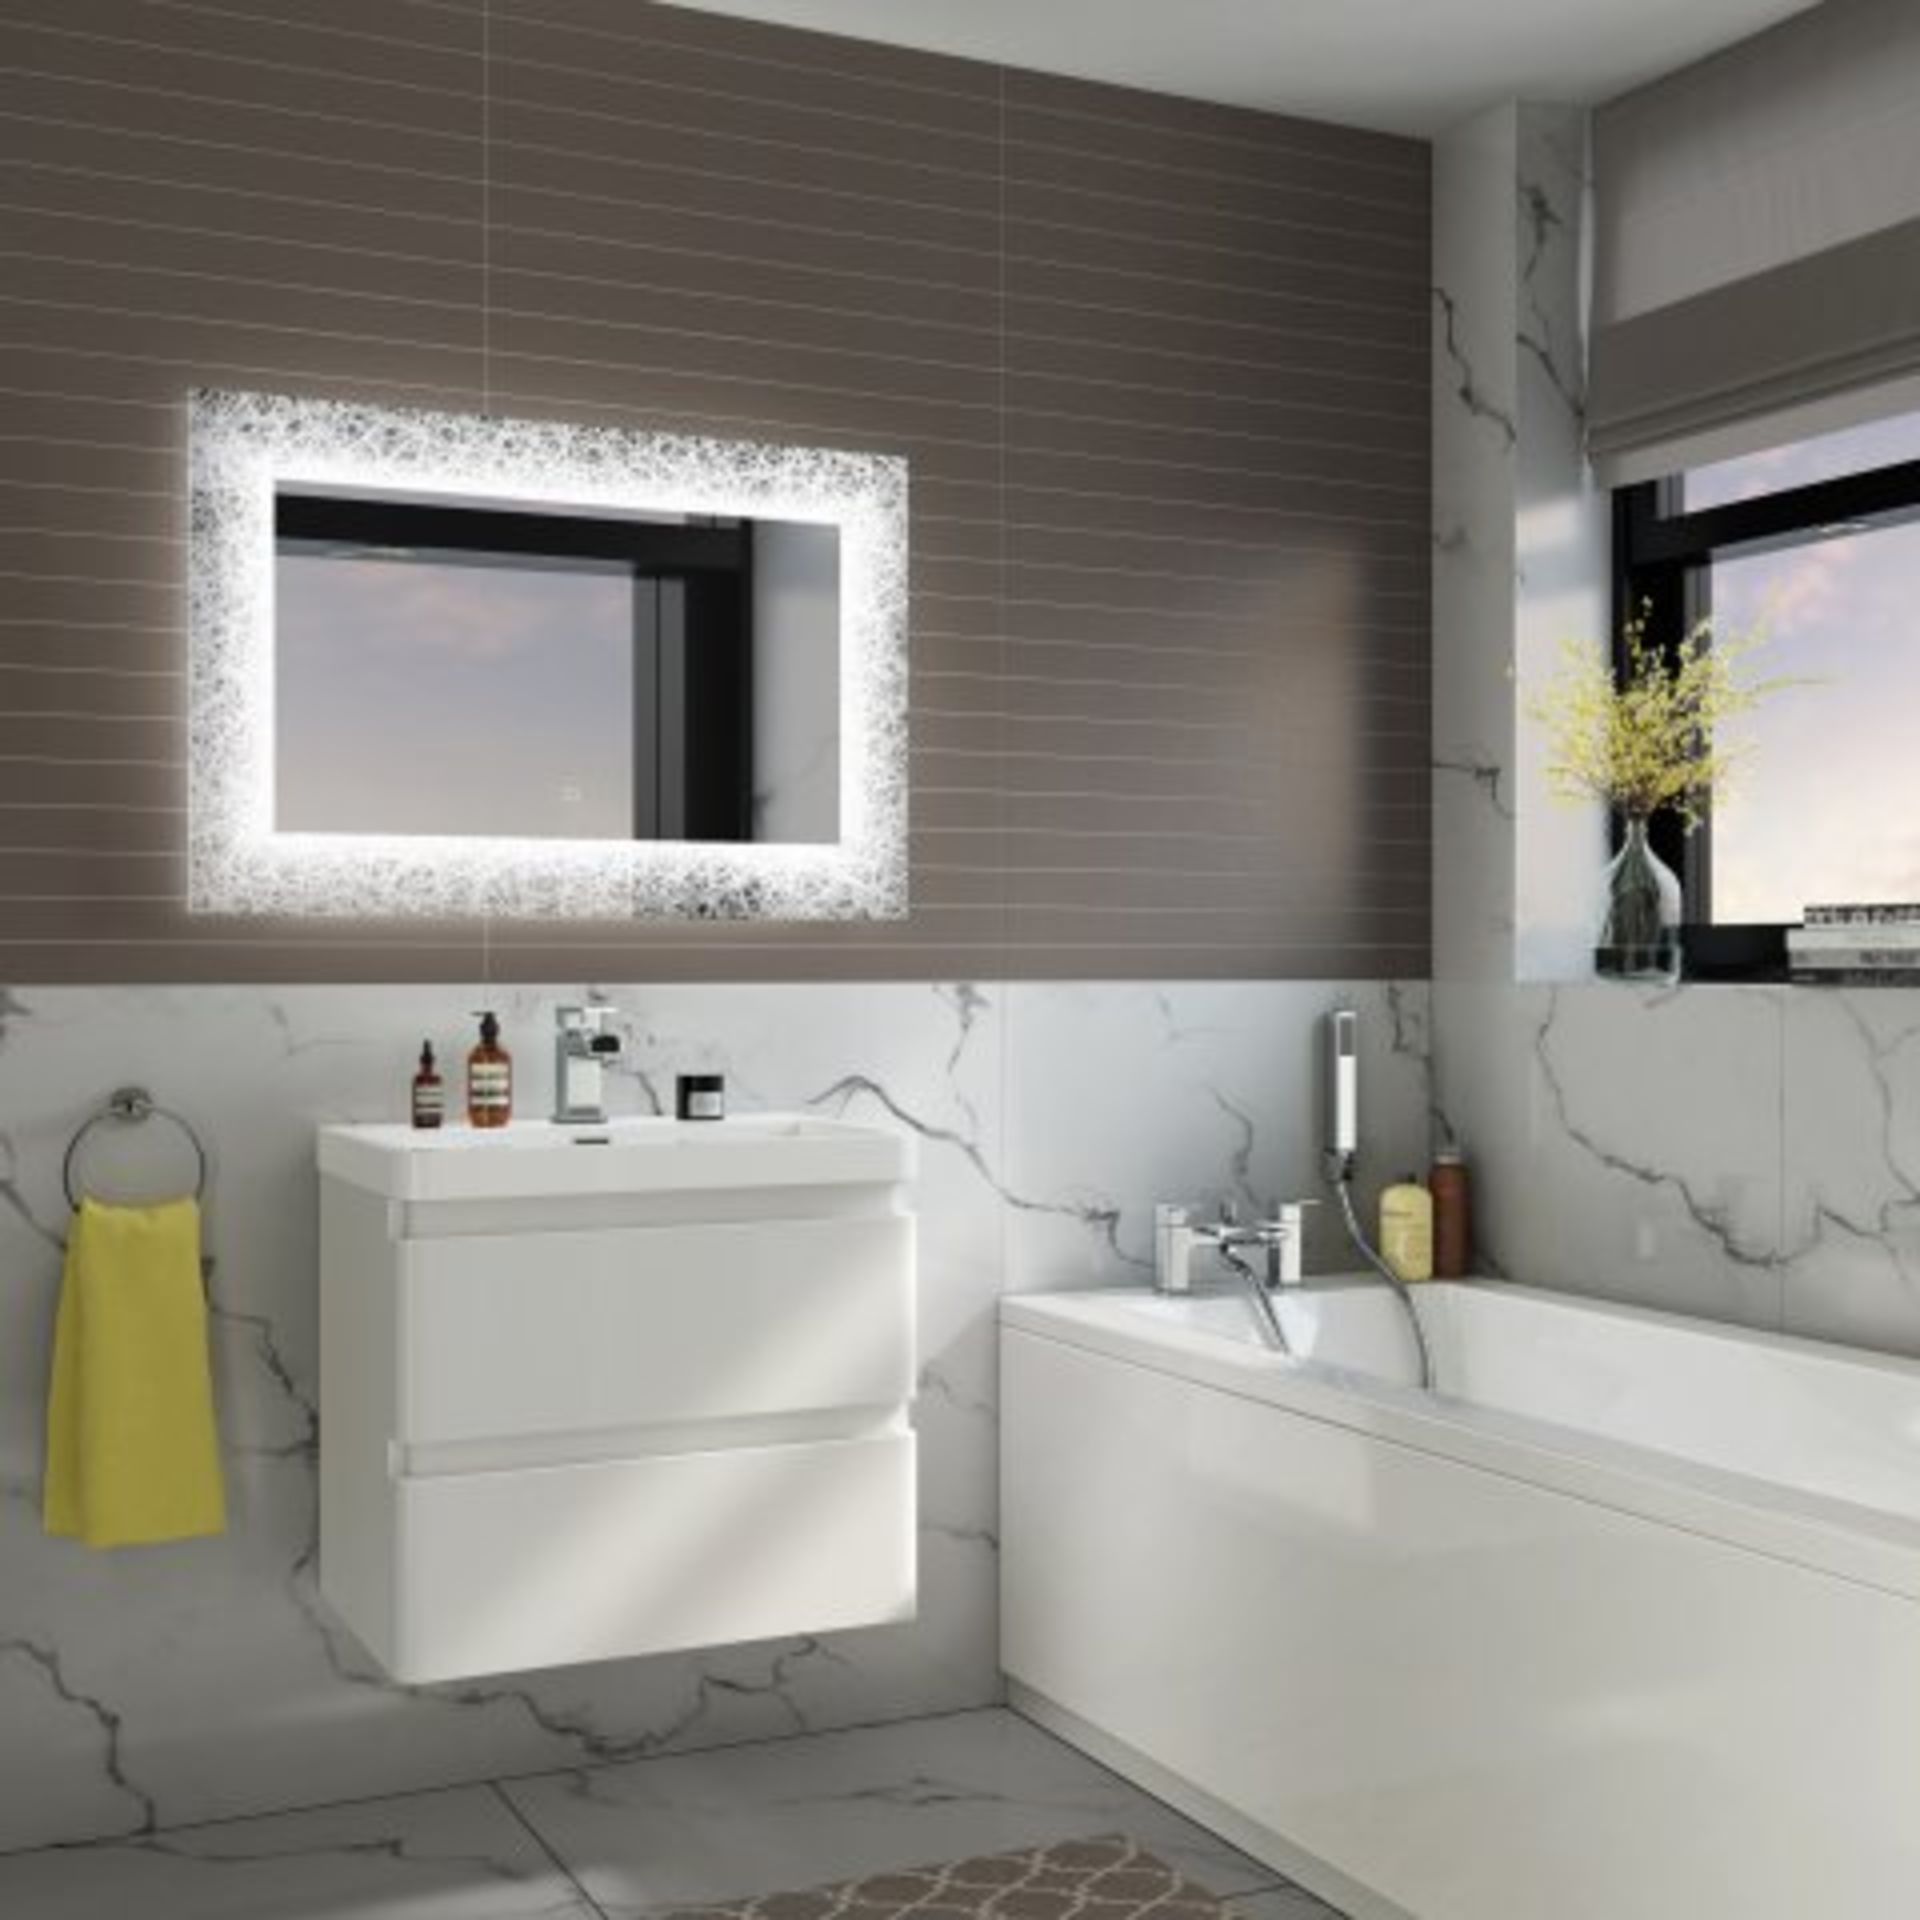 (M2) 600x900mm Galactic Designer Illuminated LED Mirror - Switch Control Light up your bathroom with - Image 4 of 4